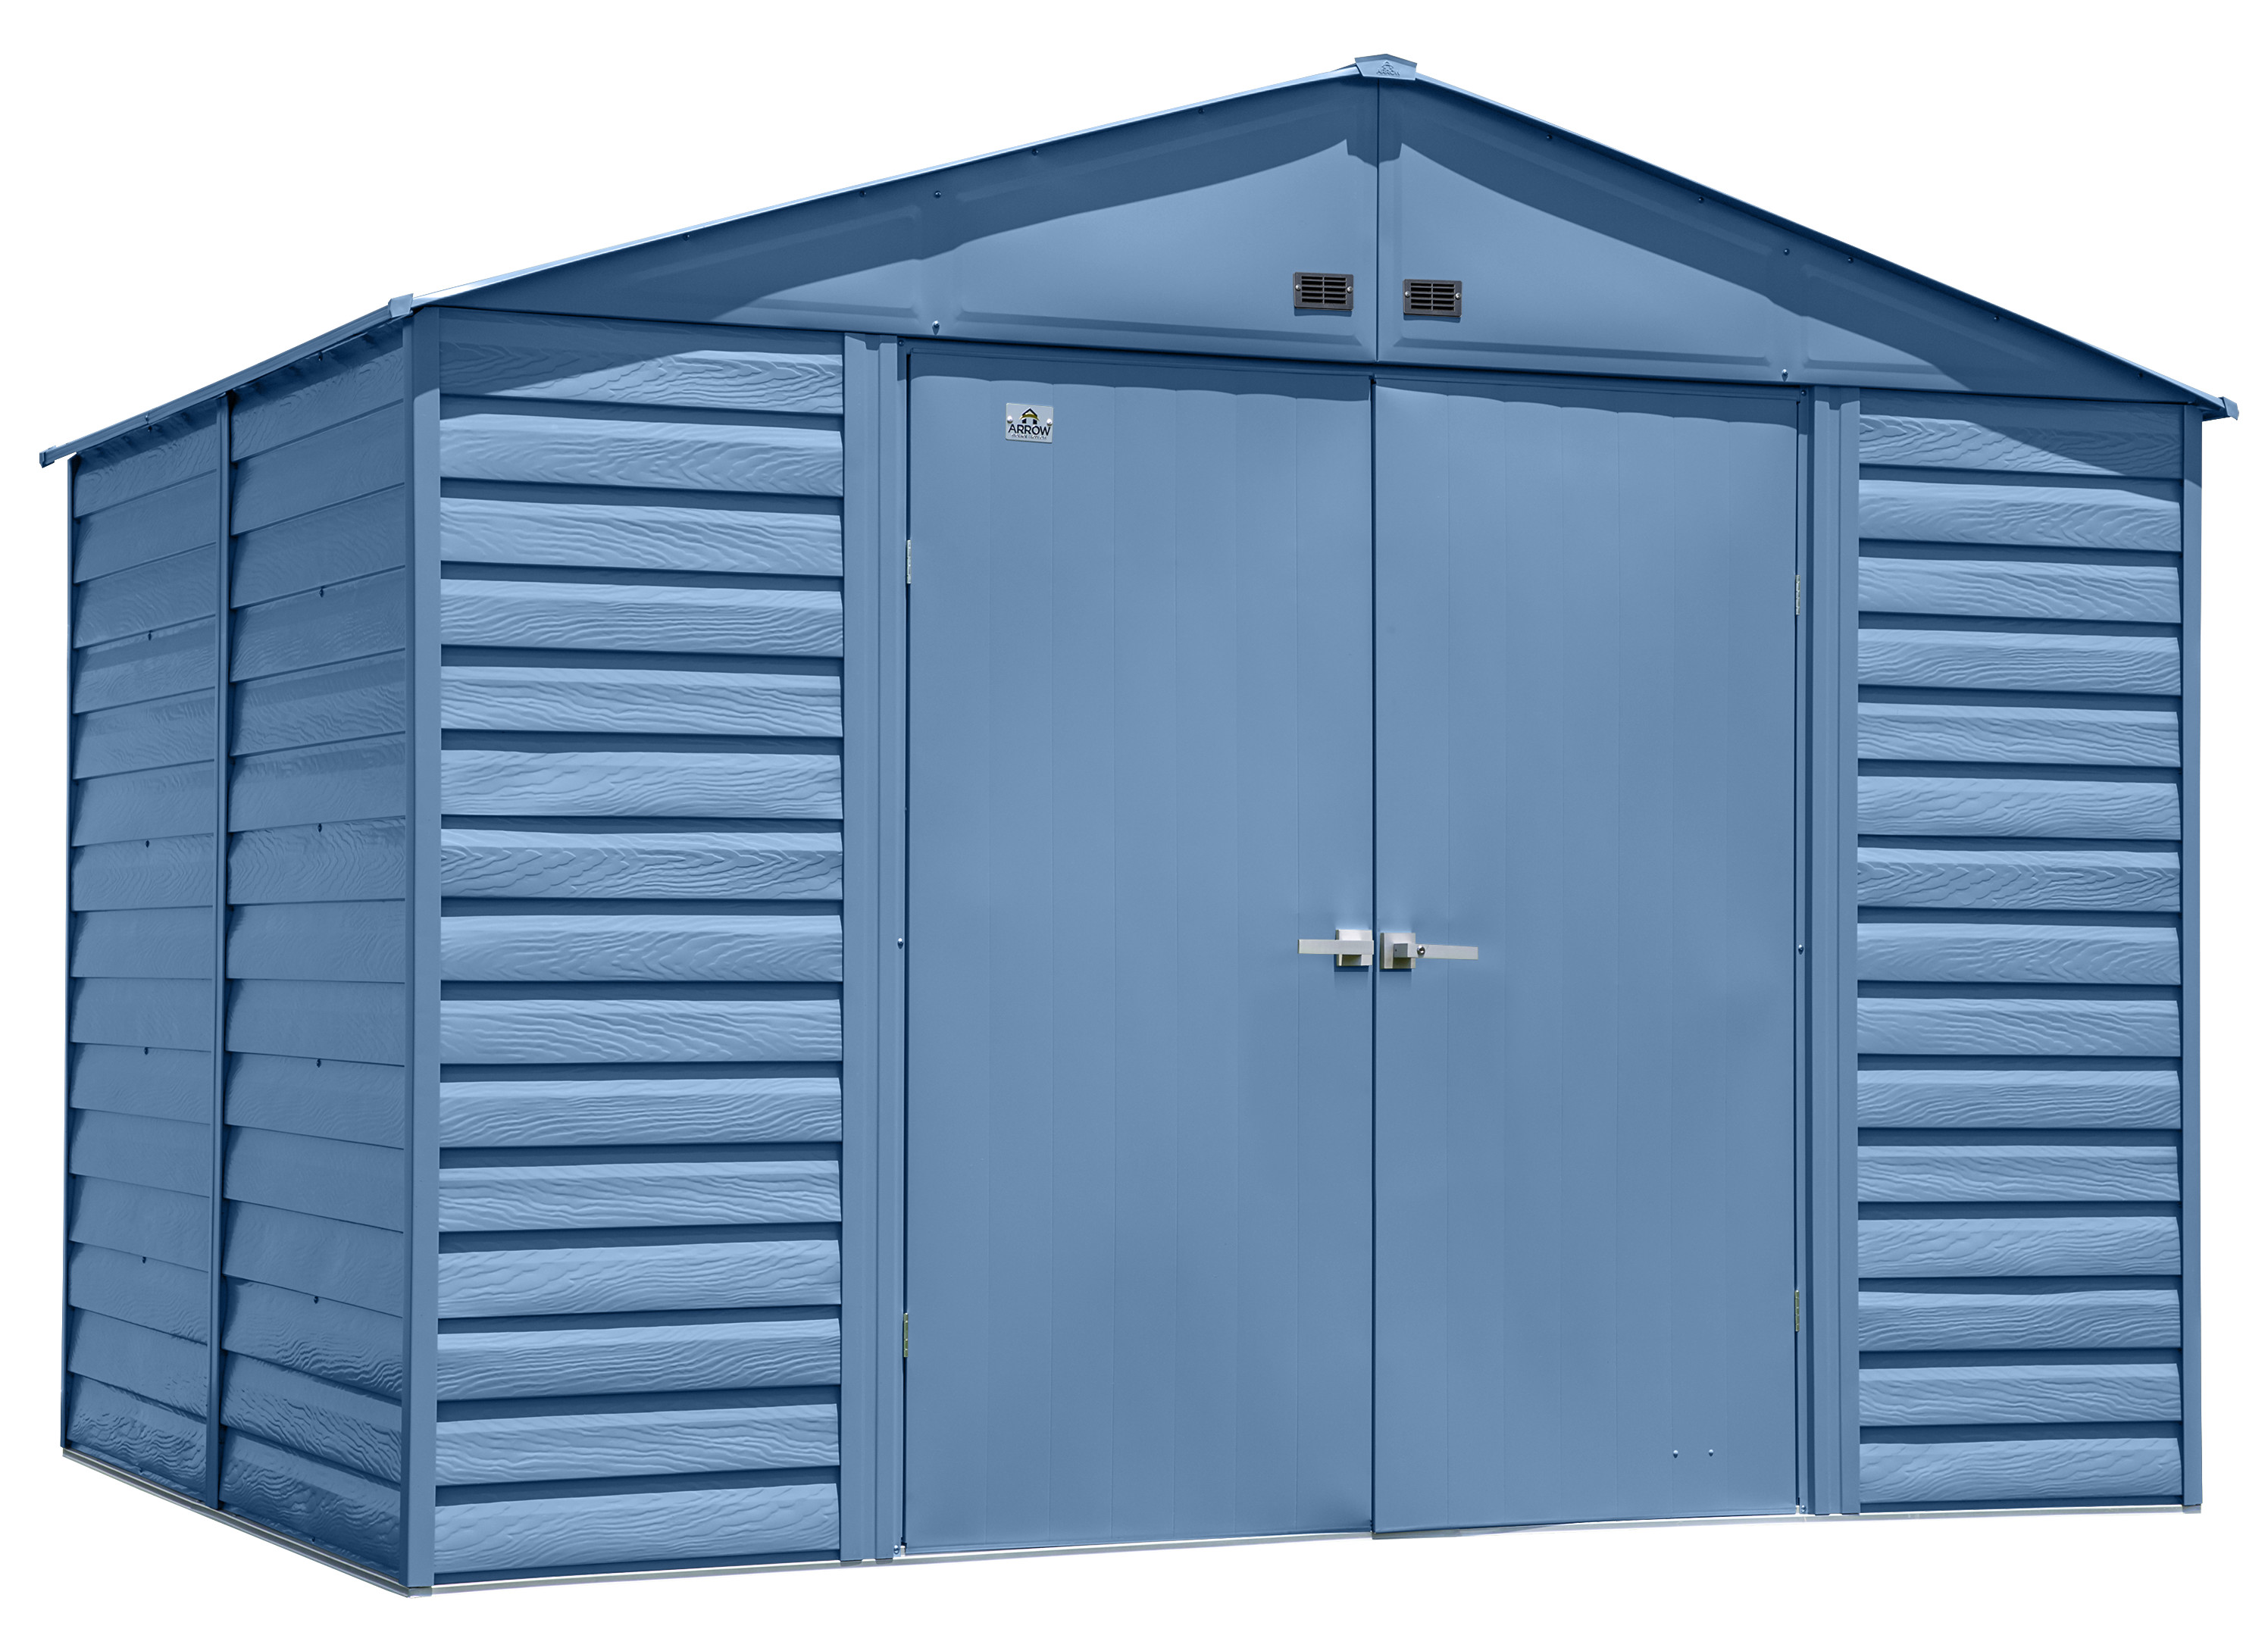 Select 10' X 8' Outdoor Lockable Steel Storage Shed Shelter